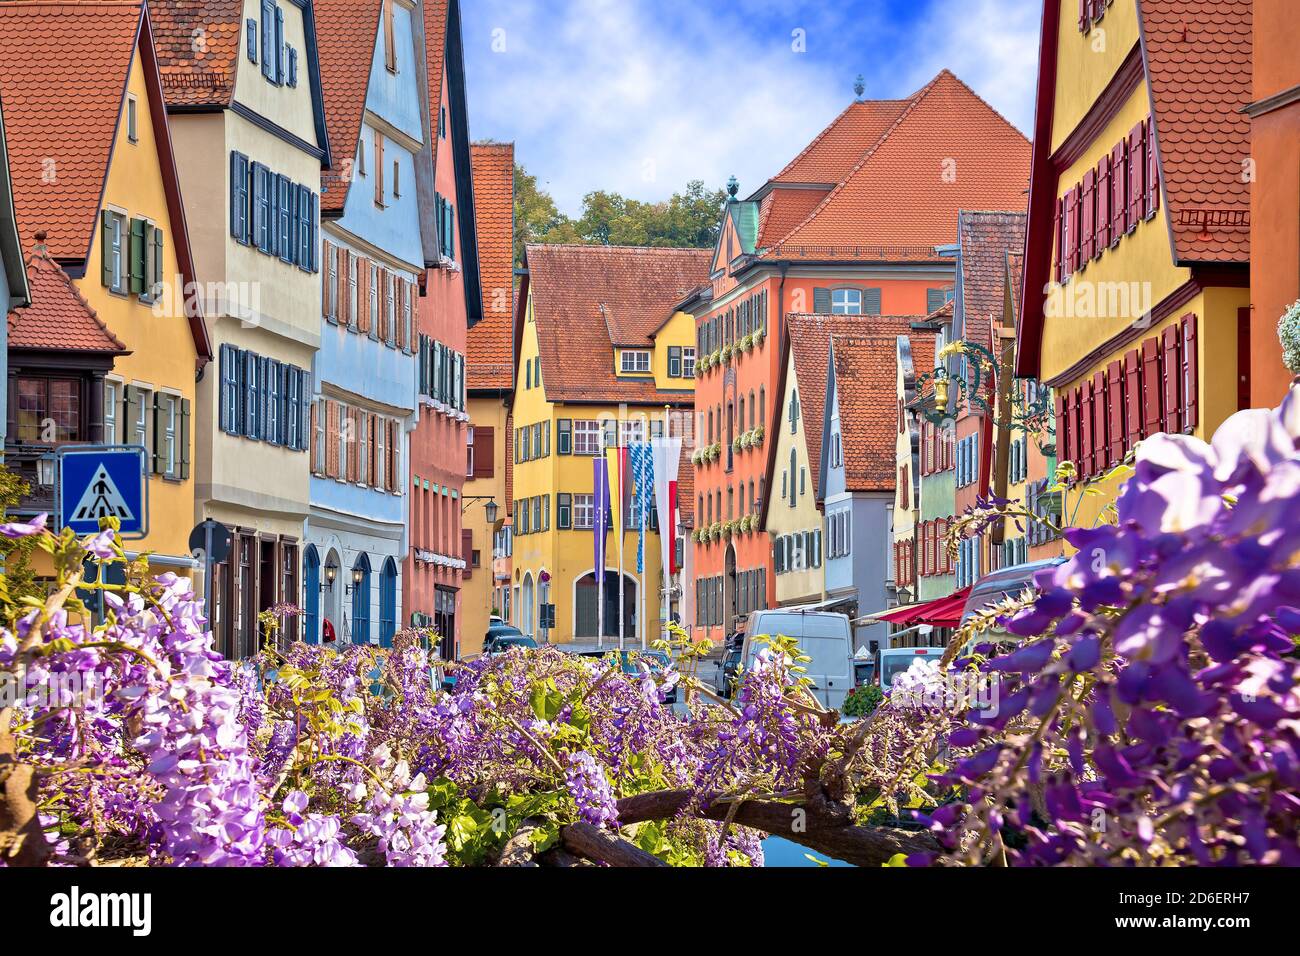 Colorful German facades of historic town of Dinkelsbuhl, Romantic road of Bavaria region of Germany Stock Photo